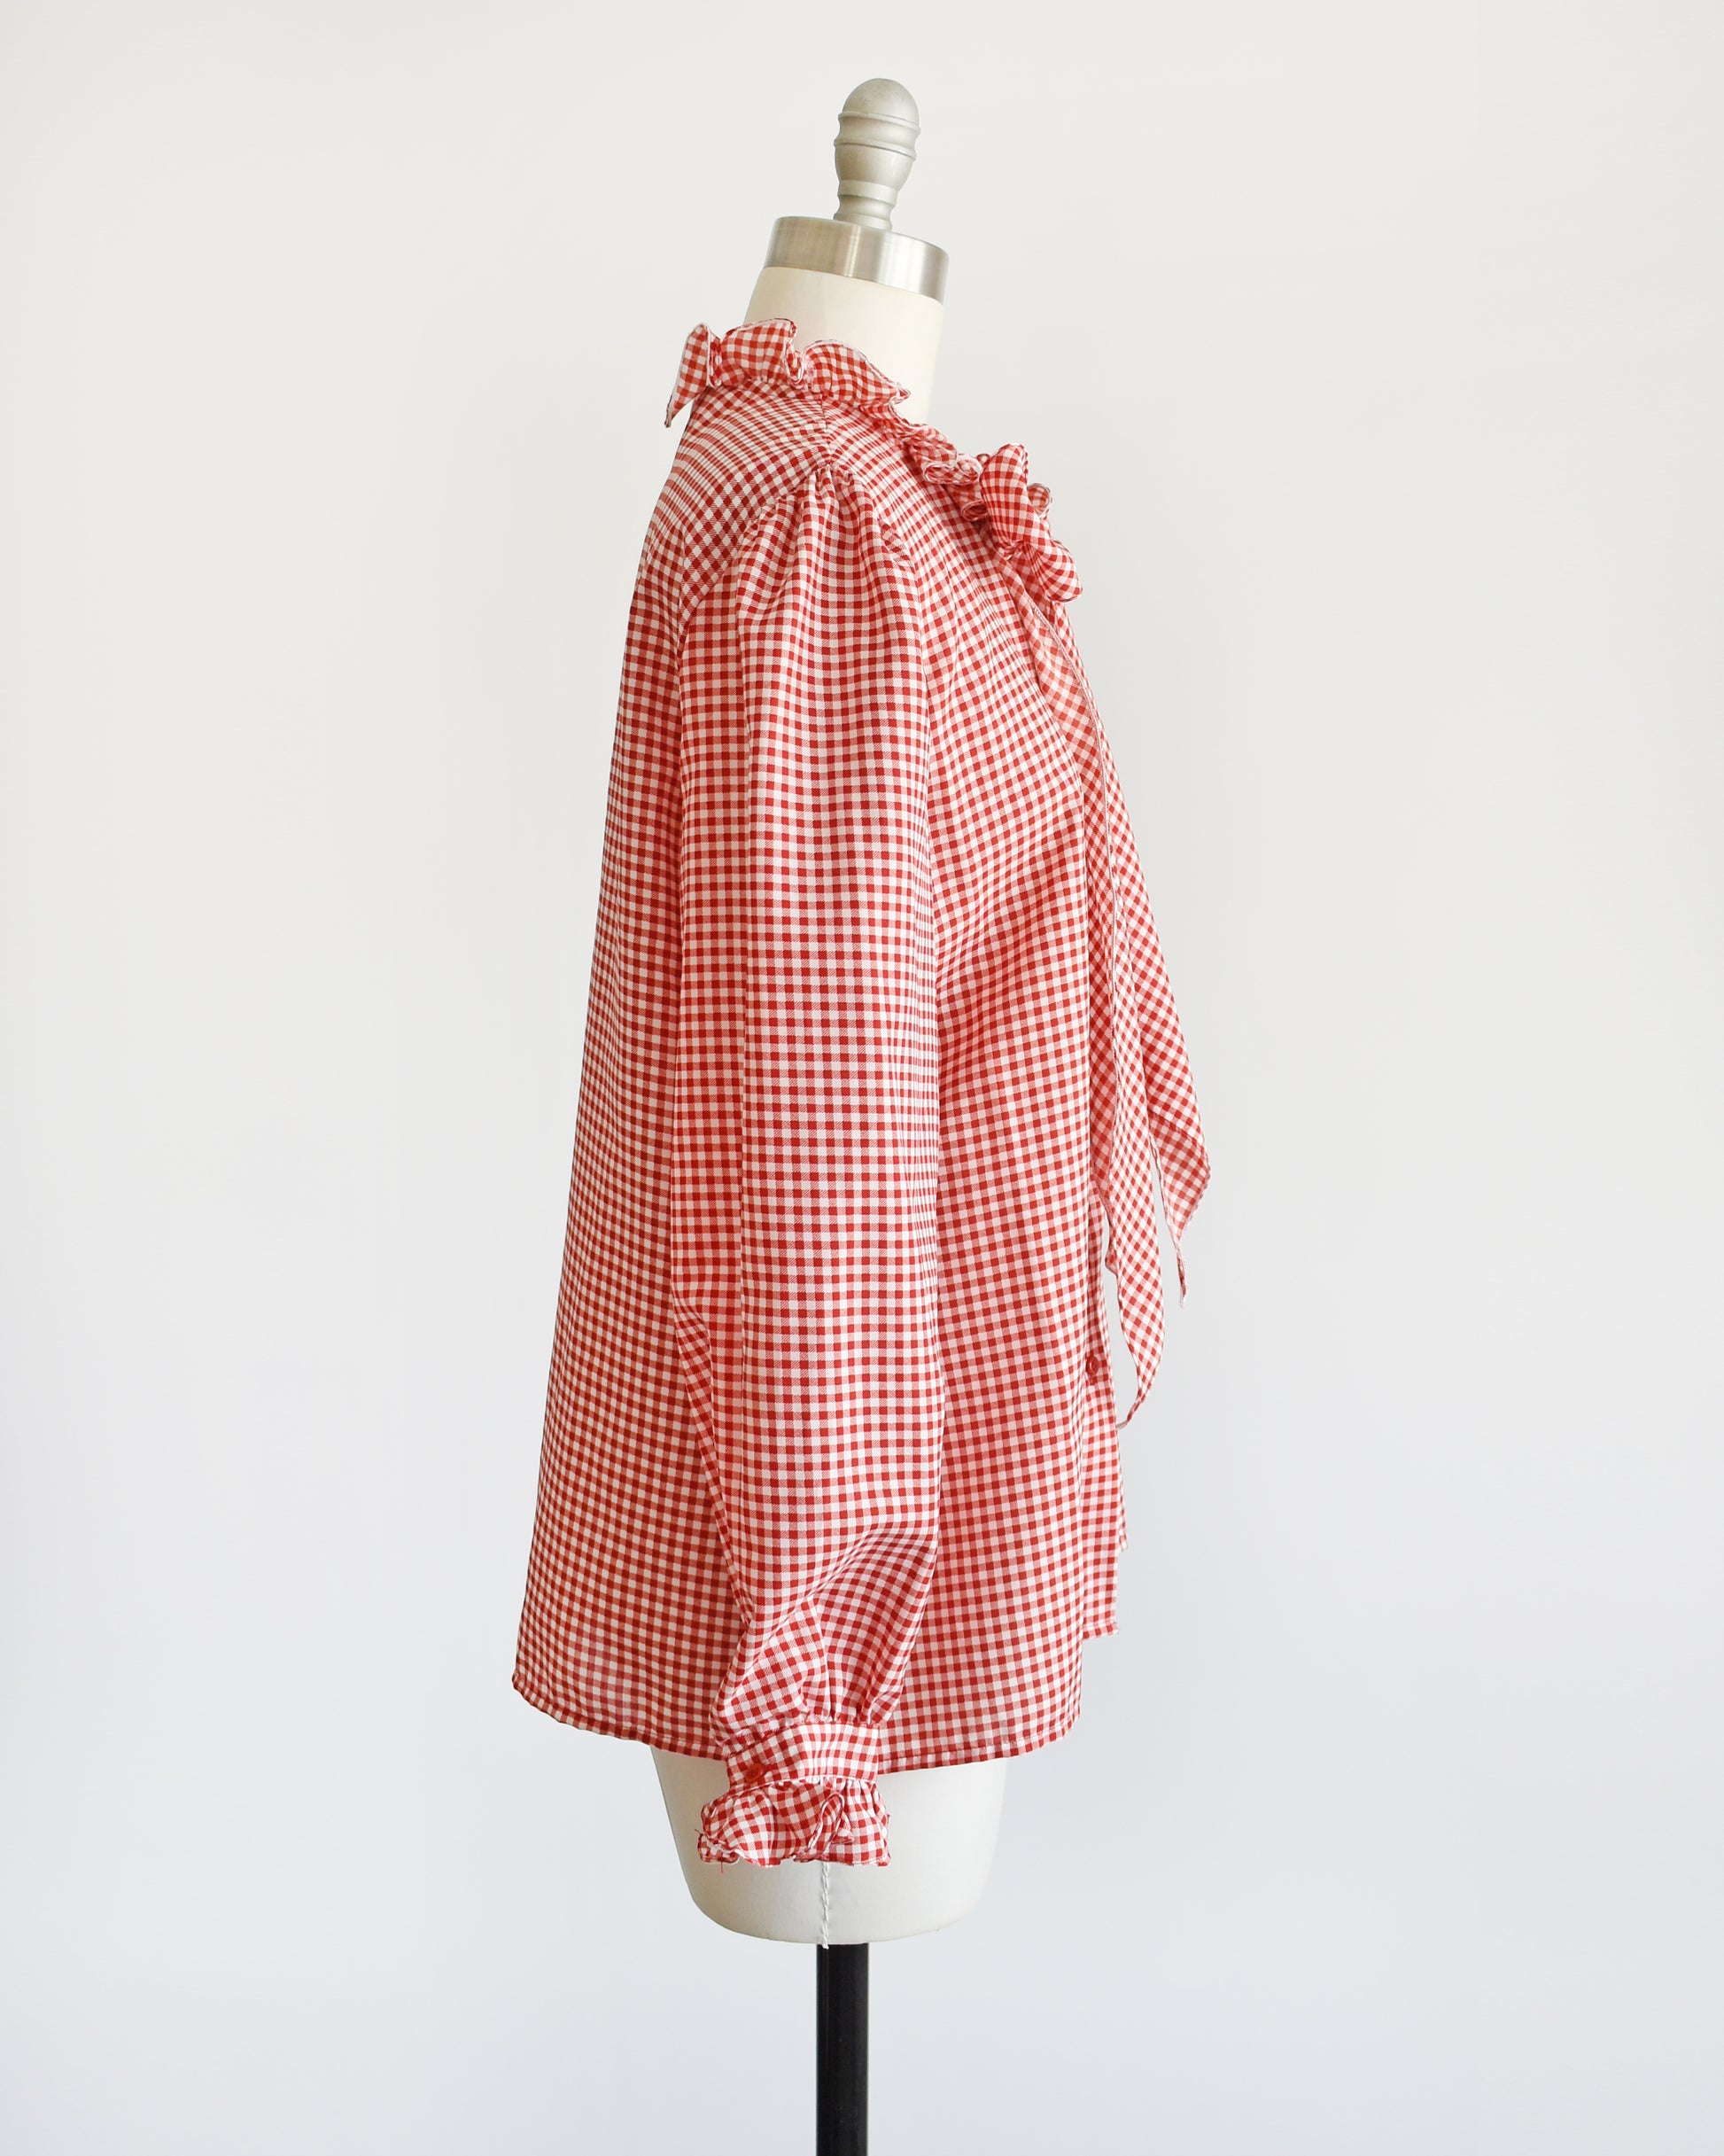 Side view of a vintage 1980s red and white gingham blouse with ruffled collar and ascot bow